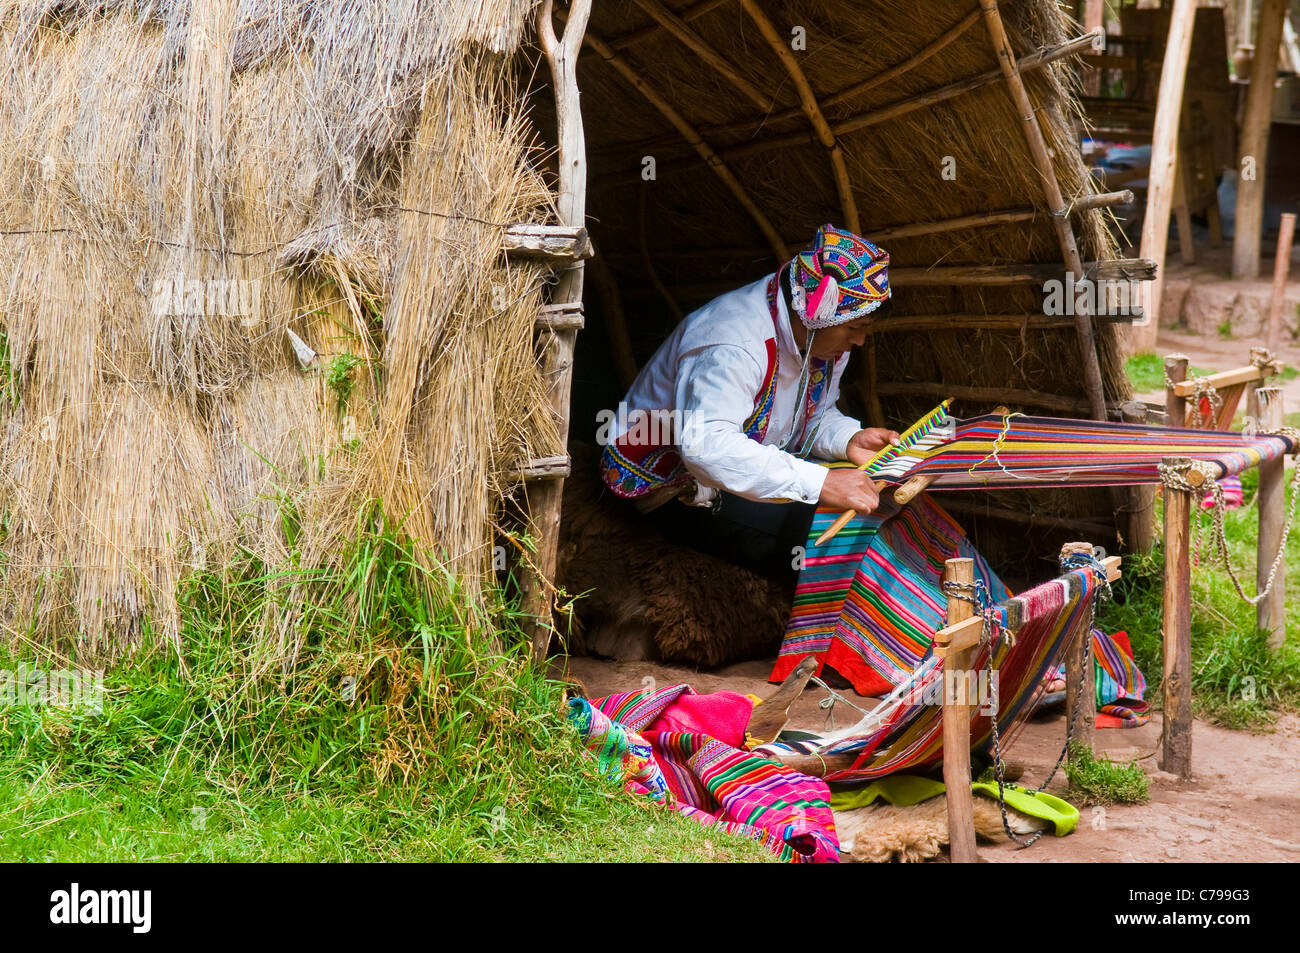 Quechua Indian man weaving with strap loom Stock Photo